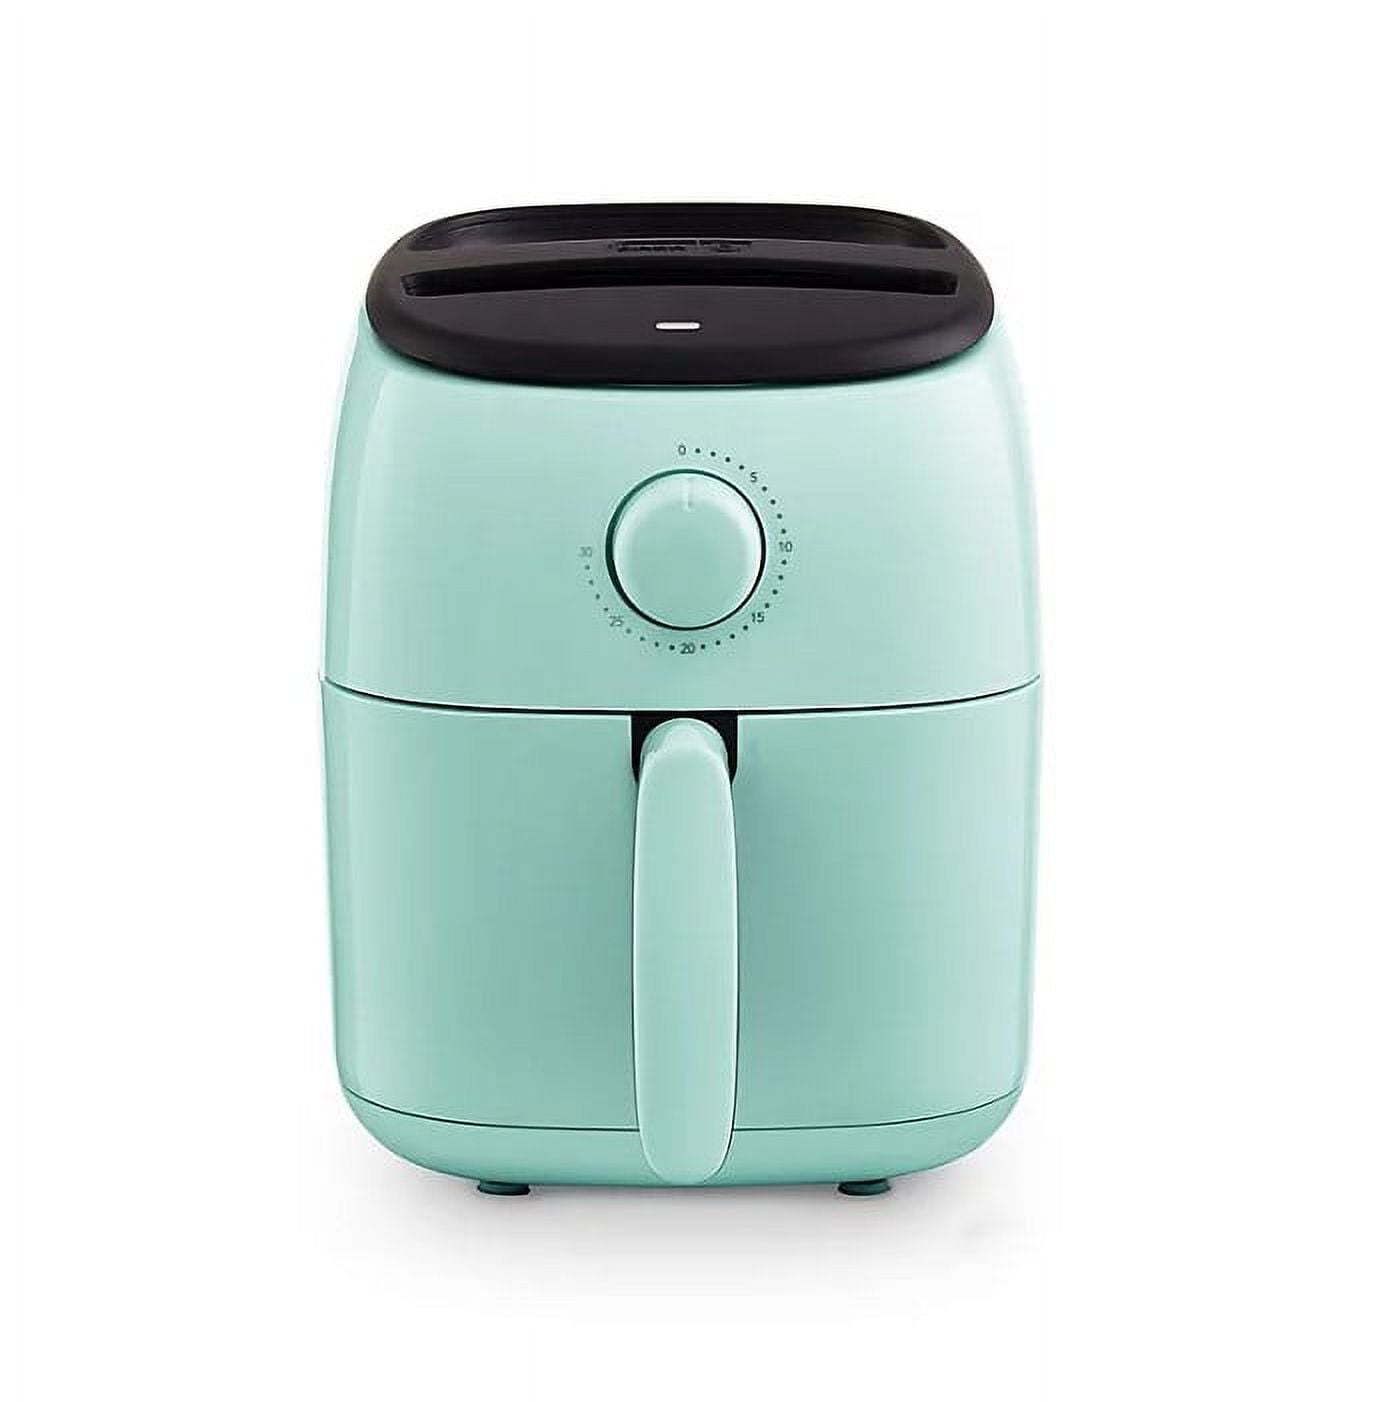 We love the compact Dash Tasti-Crisp Digital Air Fryer, and it's $20 off  exclusively on Prime Day